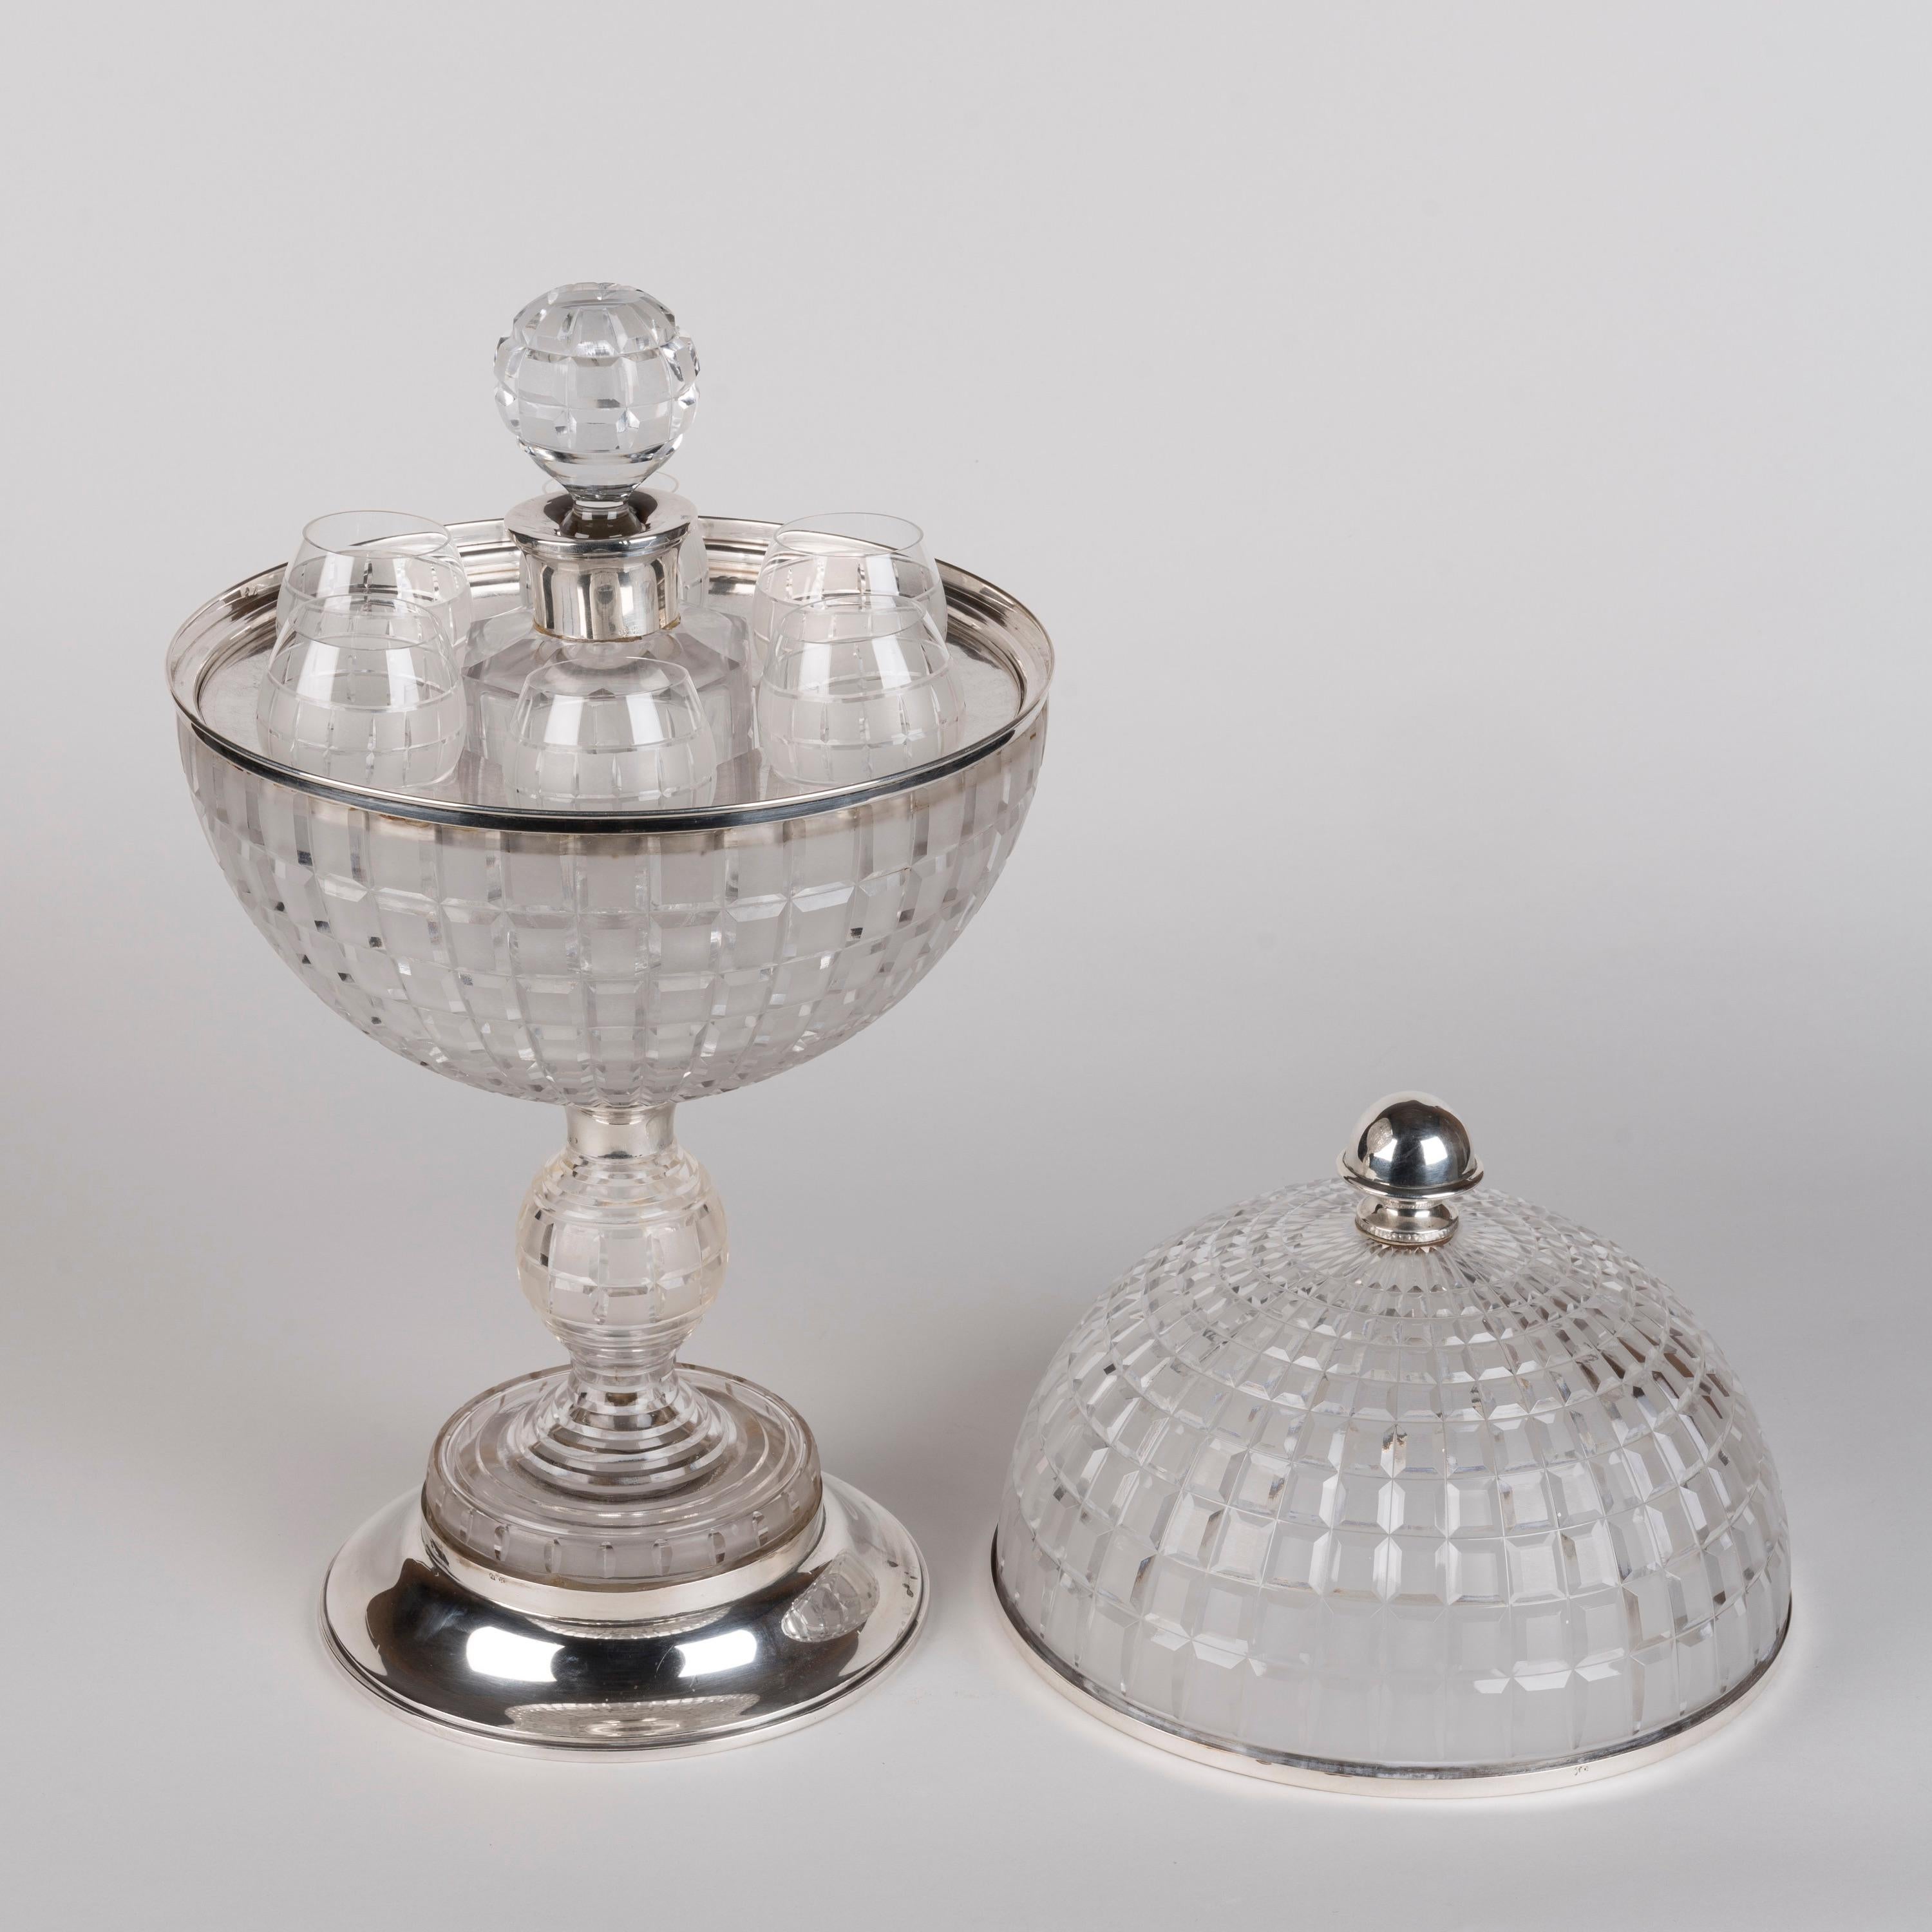 Rare 1930s Art Deco Crystal and Solid Silver Globe Drinks Set In Good Condition For Sale In London, GB